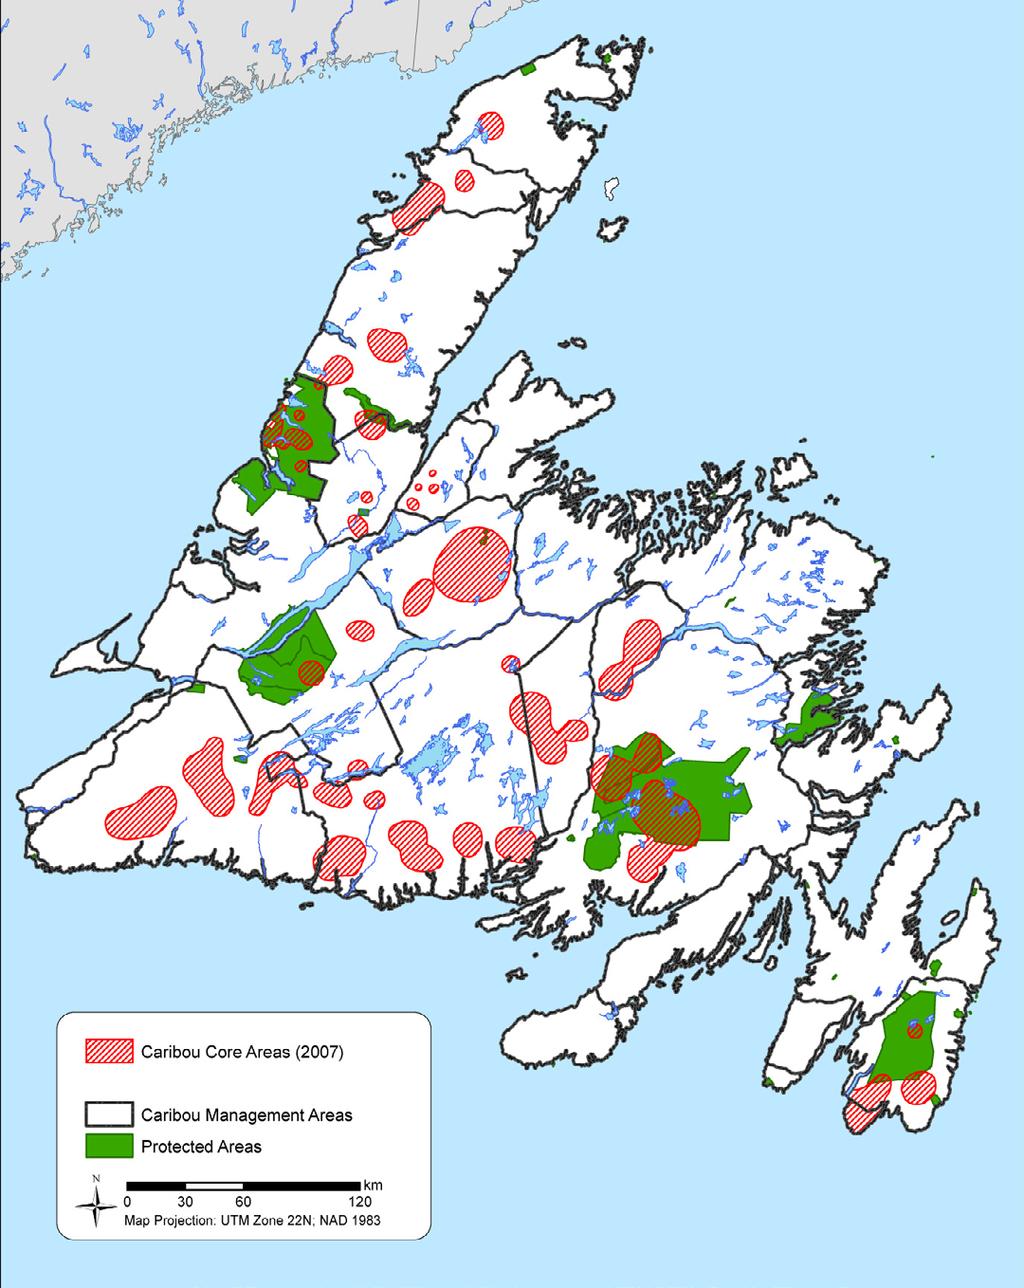 Figure 3 Original 2007 mapped areas of high importance for caribou.